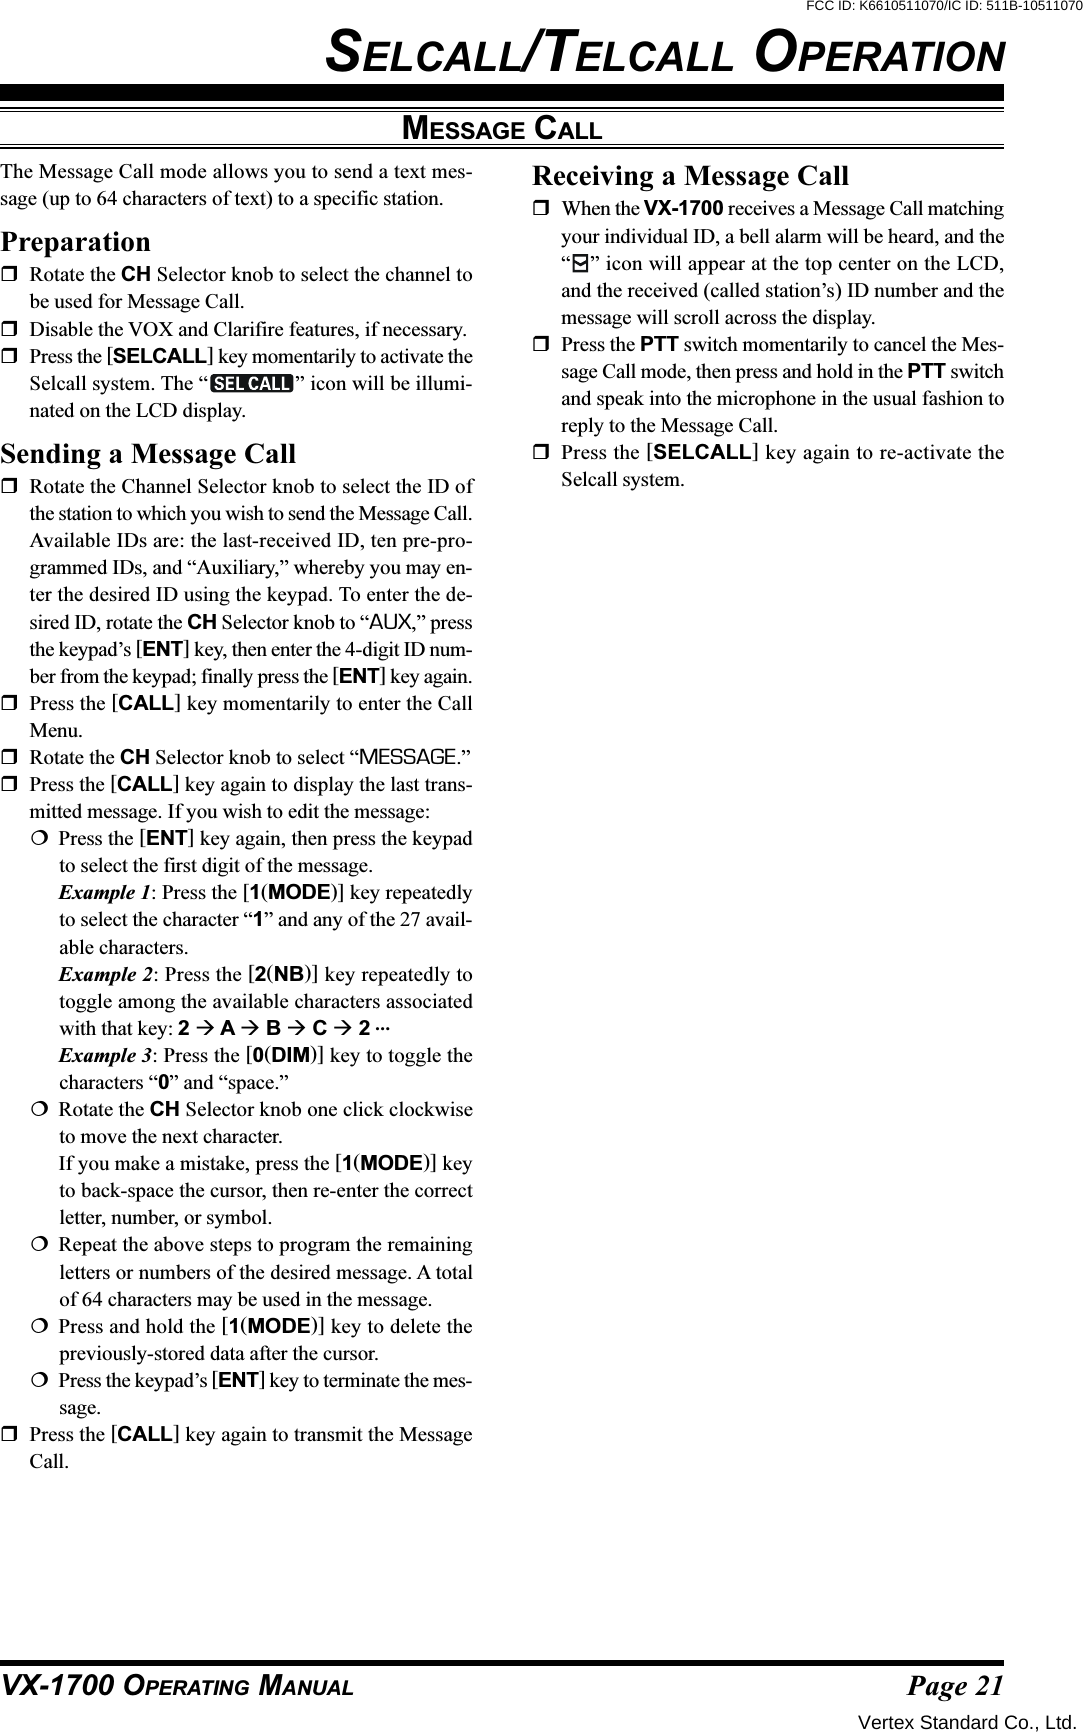 Page 21VX-1700 OPERATING MANUALMESSAGE CALLThe Message Call mode allows you to send a text mes-sage (up to 64 characters of text) to a specific station.PreparationRotate the CH Selector knob to select the channel tobe used for Message Call.Disable the VOX and Clarifire features, if necessary.Press the [SELCALL] key momentarily to activate theSelcall system. The “ ” icon will be illumi-nated on the LCD display.Sending a Message CallRotate the Channel Selector knob to select the ID ofthe station to which you wish to send the Message Call.Available IDs are: the last-received ID, ten pre-pro-grammed IDs, and “Auxiliary,” whereby you may en-ter the desired ID using the keypad. To enter the de-sired ID, rotate the CH Selector knob to “AUX,” pressthe keypad’s [ENT] key, then enter the 4-digit ID num-ber from the keypad; finally press the [ENT] key again.Press the [CALL] key momentarily to enter the CallMenu.Rotate the CH Selector knob to select “MESSAGE.”Press the [CALL] key again to display the last trans-mitted message. If you wish to edit the message:Press the [ENT] key again, then press the keypadto select the first digit of the message.Example 1: Press the [1(MODE)] key repeatedlyto select the character “1” and any of the 27 avail-able characters.Example 2: Press the [2(NB)] key repeatedly totoggle among the available characters associatedwith that key: 2  A  B  C  2 …Example 3: Press the [0(DIM)] key to toggle thecharacters “0” and “space.”Rotate the CH Selector knob one click clockwiseto move the next character.If you make a mistake, press the [1(MODE)] keyto back-space the cursor, then re-enter the correctletter, number, or symbol.Repeat the above steps to program the remainingletters or numbers of the desired message. A totalof 64 characters may be used in the message.Press and hold the [1(MODE)] key to delete thepreviously-stored data after the cursor.Press the keypad’s [ENT] key to terminate the mes-sage.Press the [CALL] key again to transmit the MessageCall.SELCALL/TELCALL OPERATIONReceiving a Message CallWhen the VX-1700 receives a Message Call matchingyour individual ID, a bell alarm will be heard, and the“” icon will appear at the top center on the LCD,and the received (called station’s) ID number and themessage will scroll across the display.Press the PTT switch momentarily to cancel the Mes-sage Call mode, then press and hold in the PTT switchand speak into the microphone in the usual fashion toreply to the Message Call.Press the [SELCALL] key again to re-activate theSelcall system.Vertex Standard Co., Ltd.FCC ID: K6610511070/IC ID: 511B-10511070